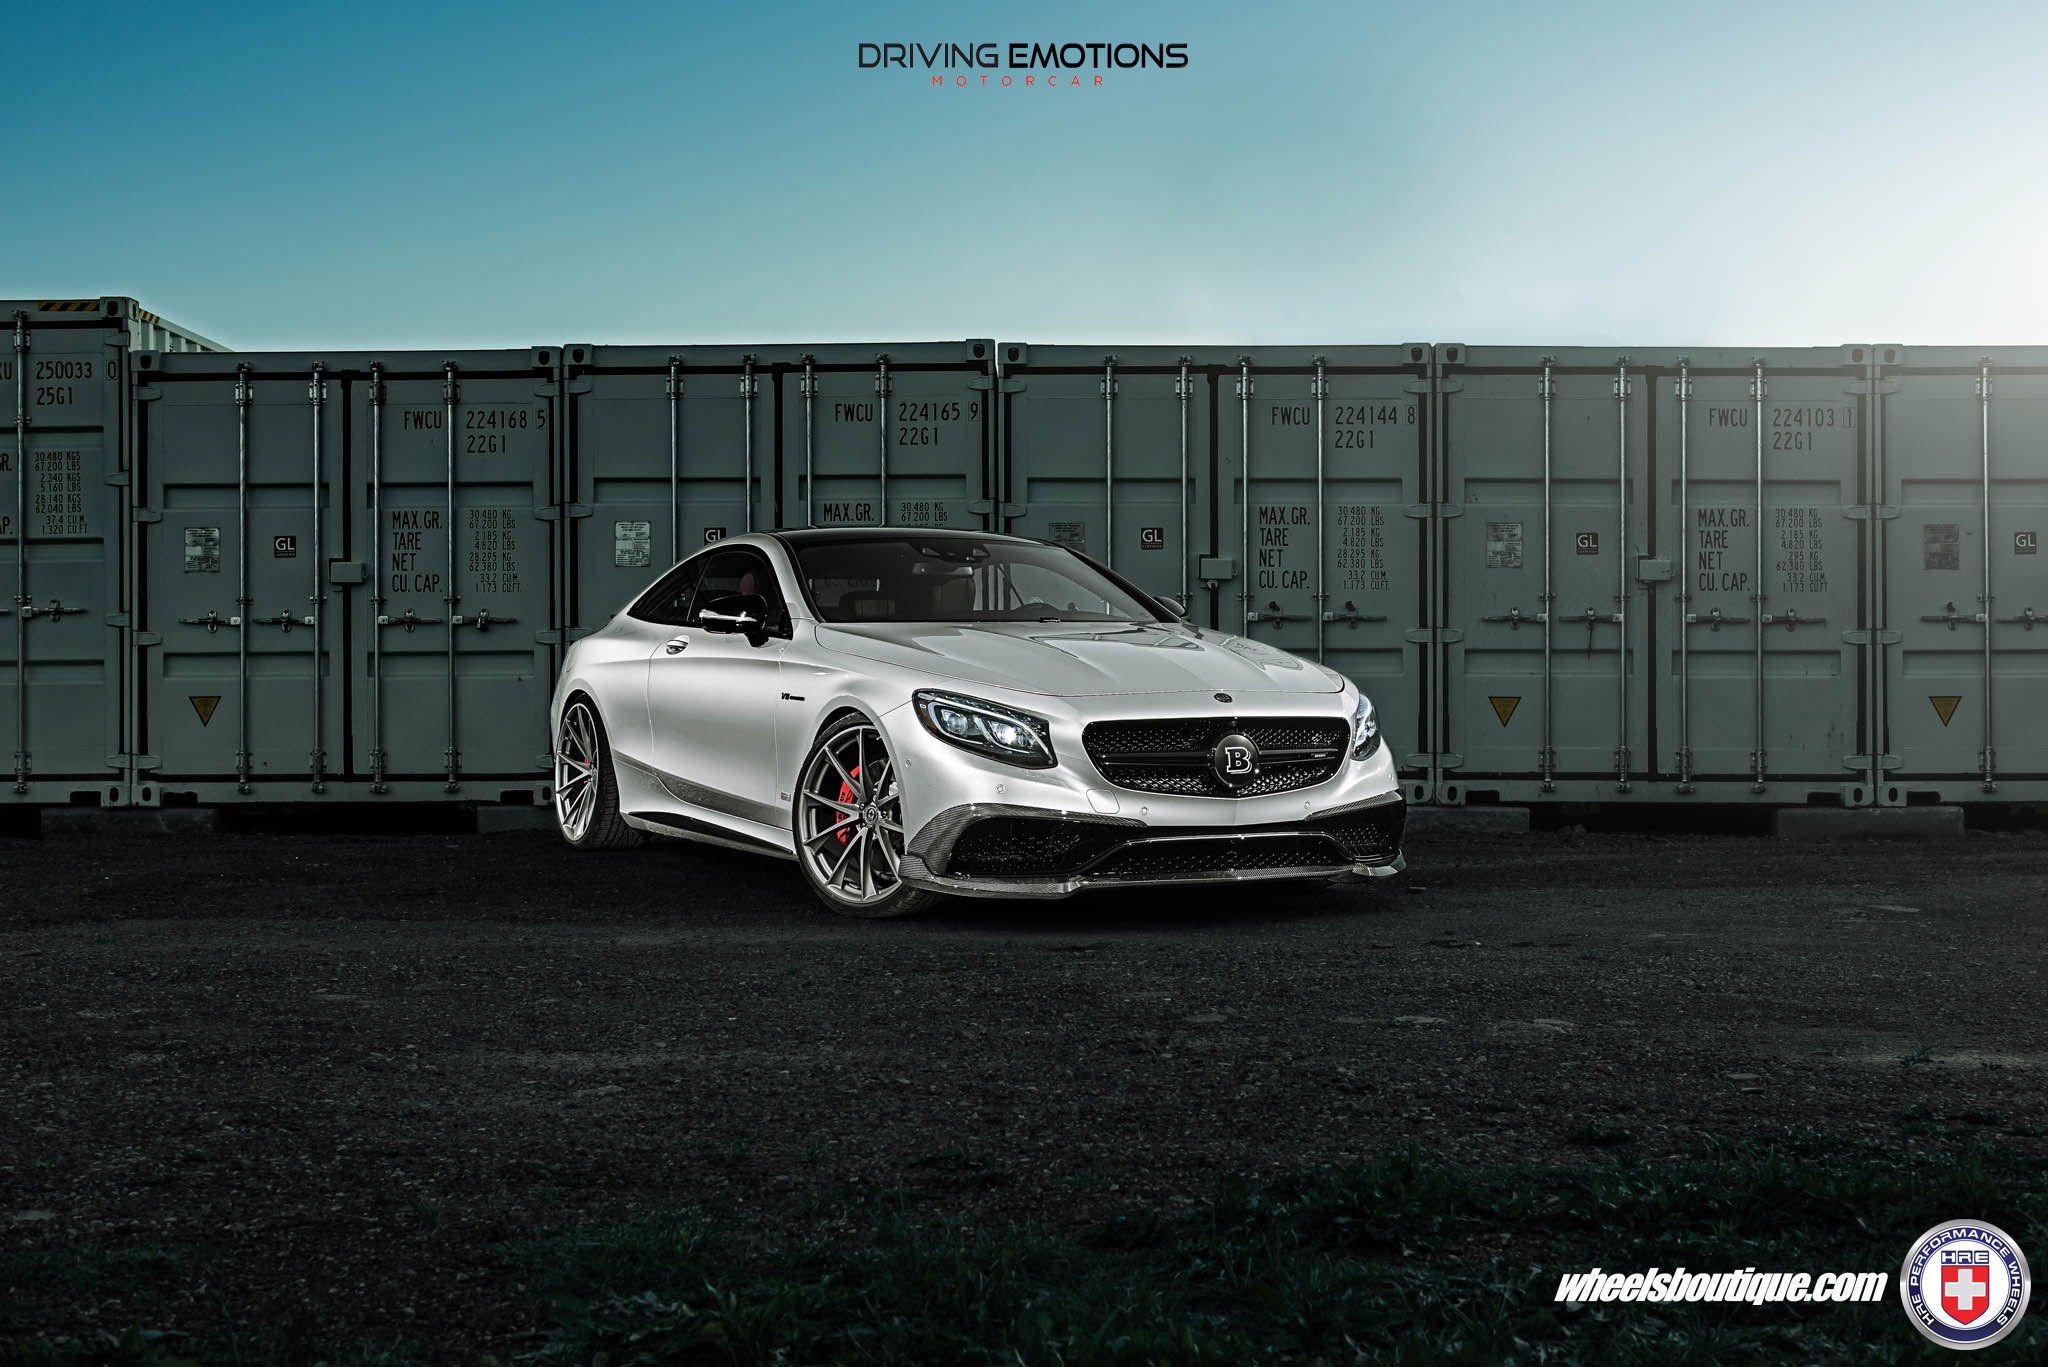 hre, Wheels, Cars, Mercedes, S63, Coupe, Silver Wallpaper